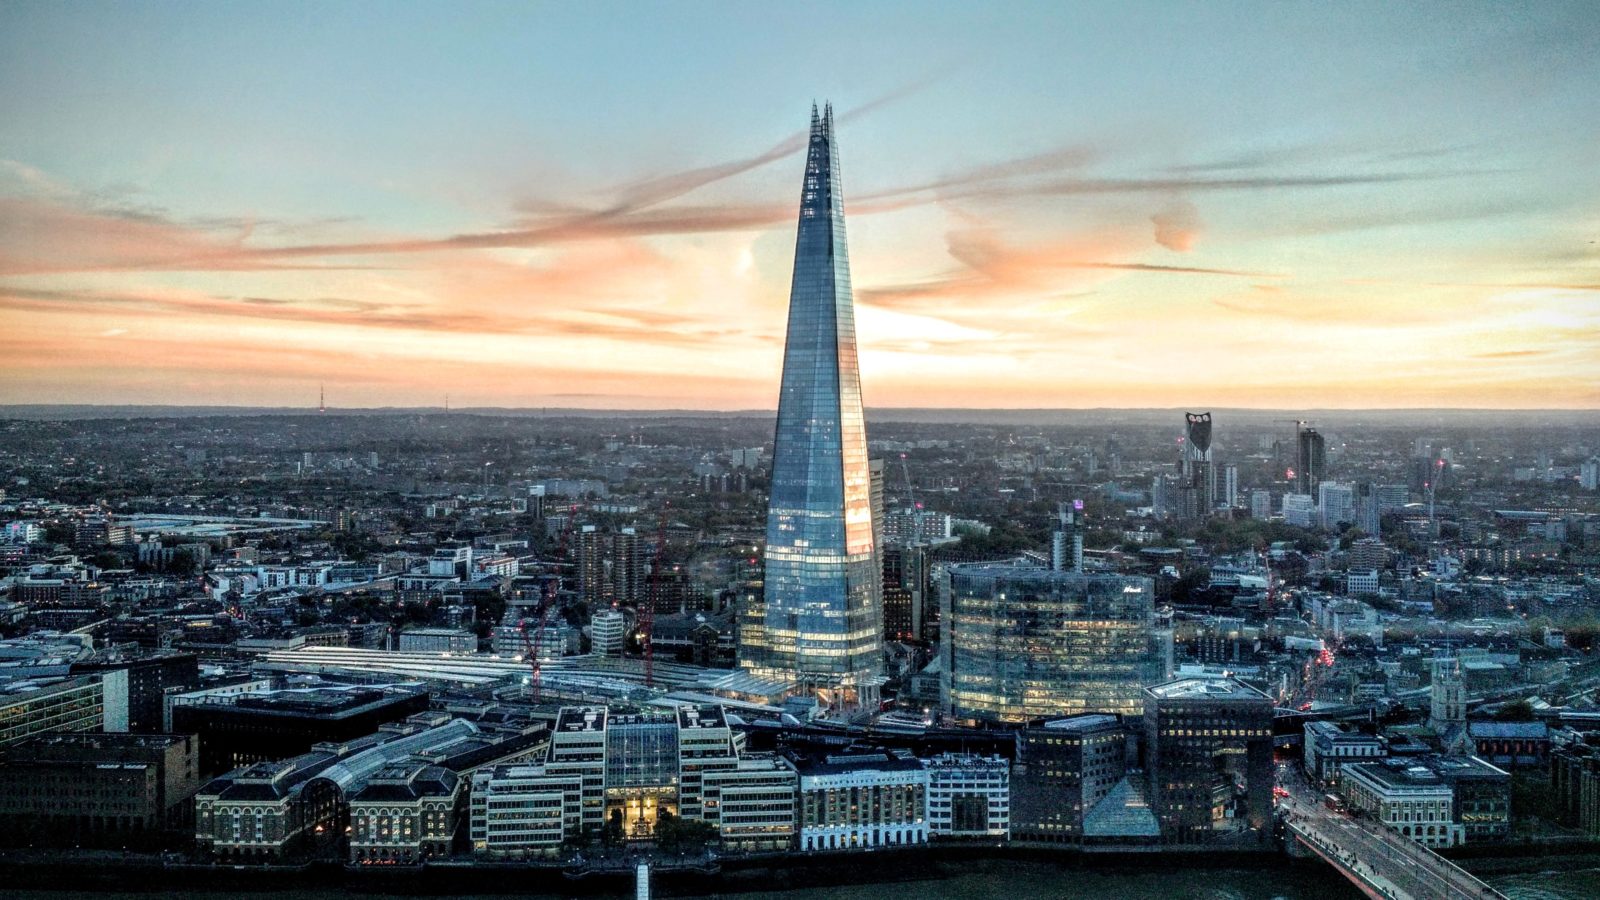 London will only realise its true potential if it unlocks the power of data, says key report